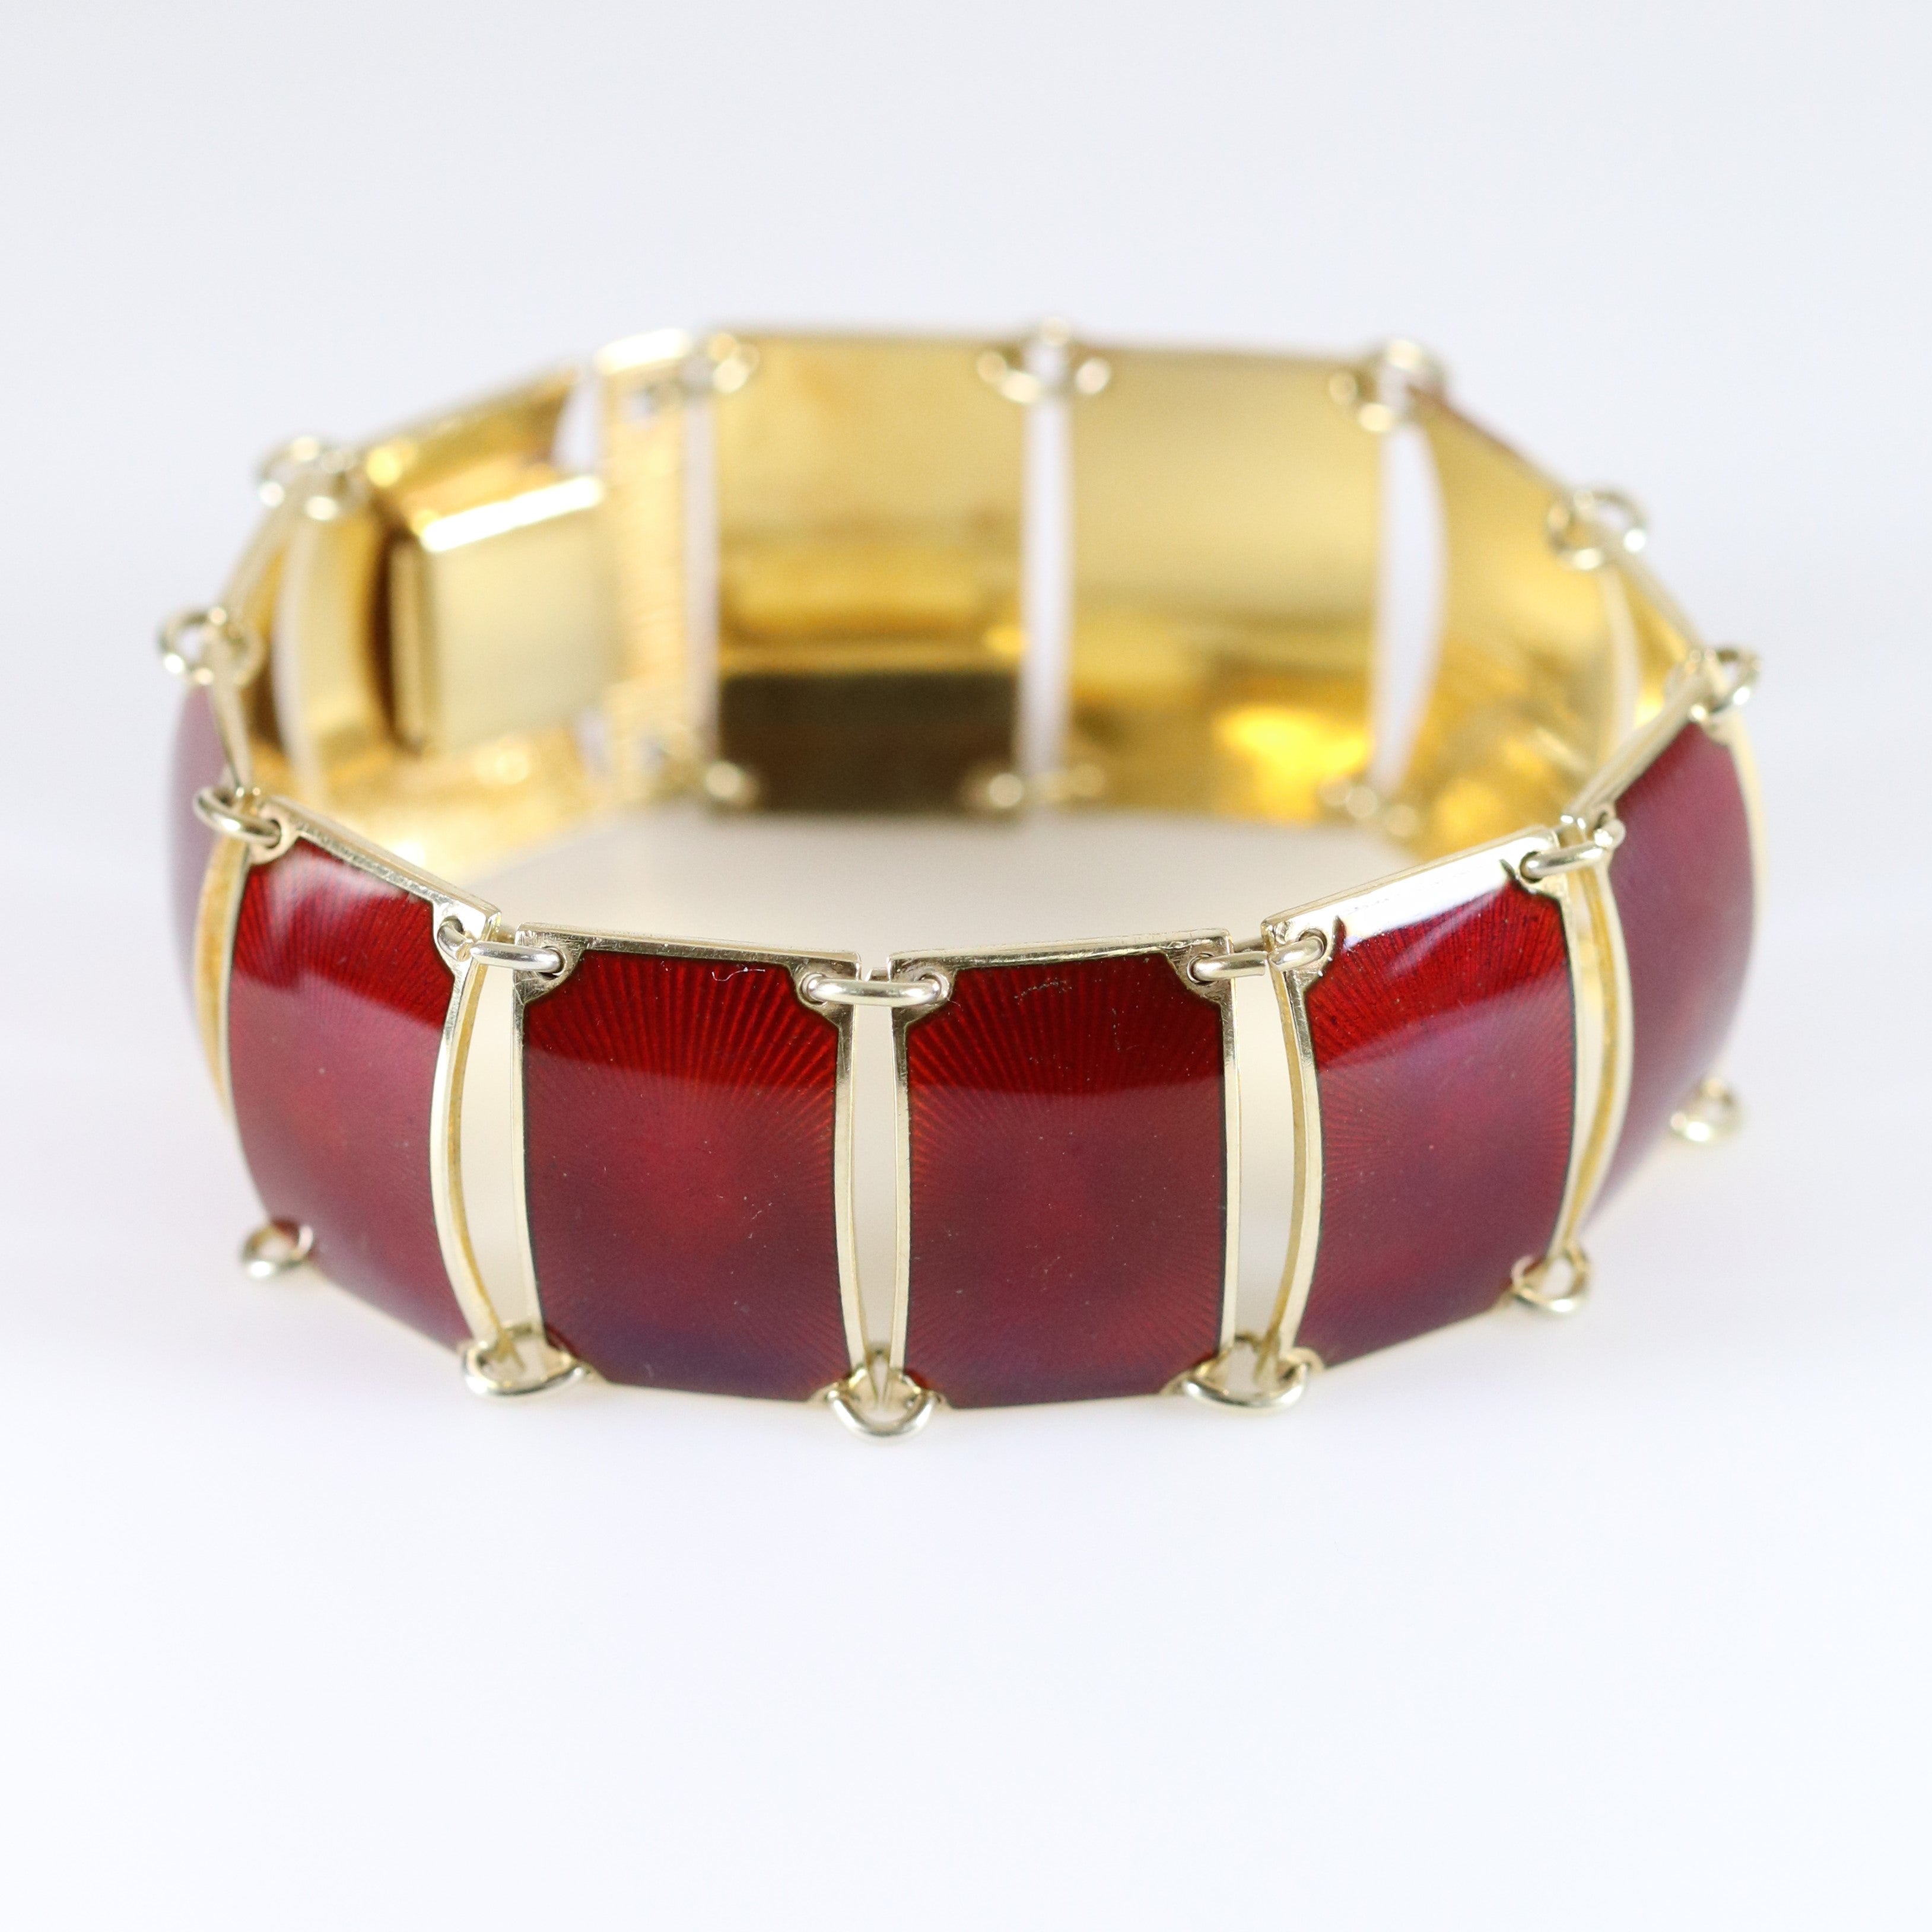 FRED Vintage Gold, Topaz And Enamel Cuff Bracelet Available For